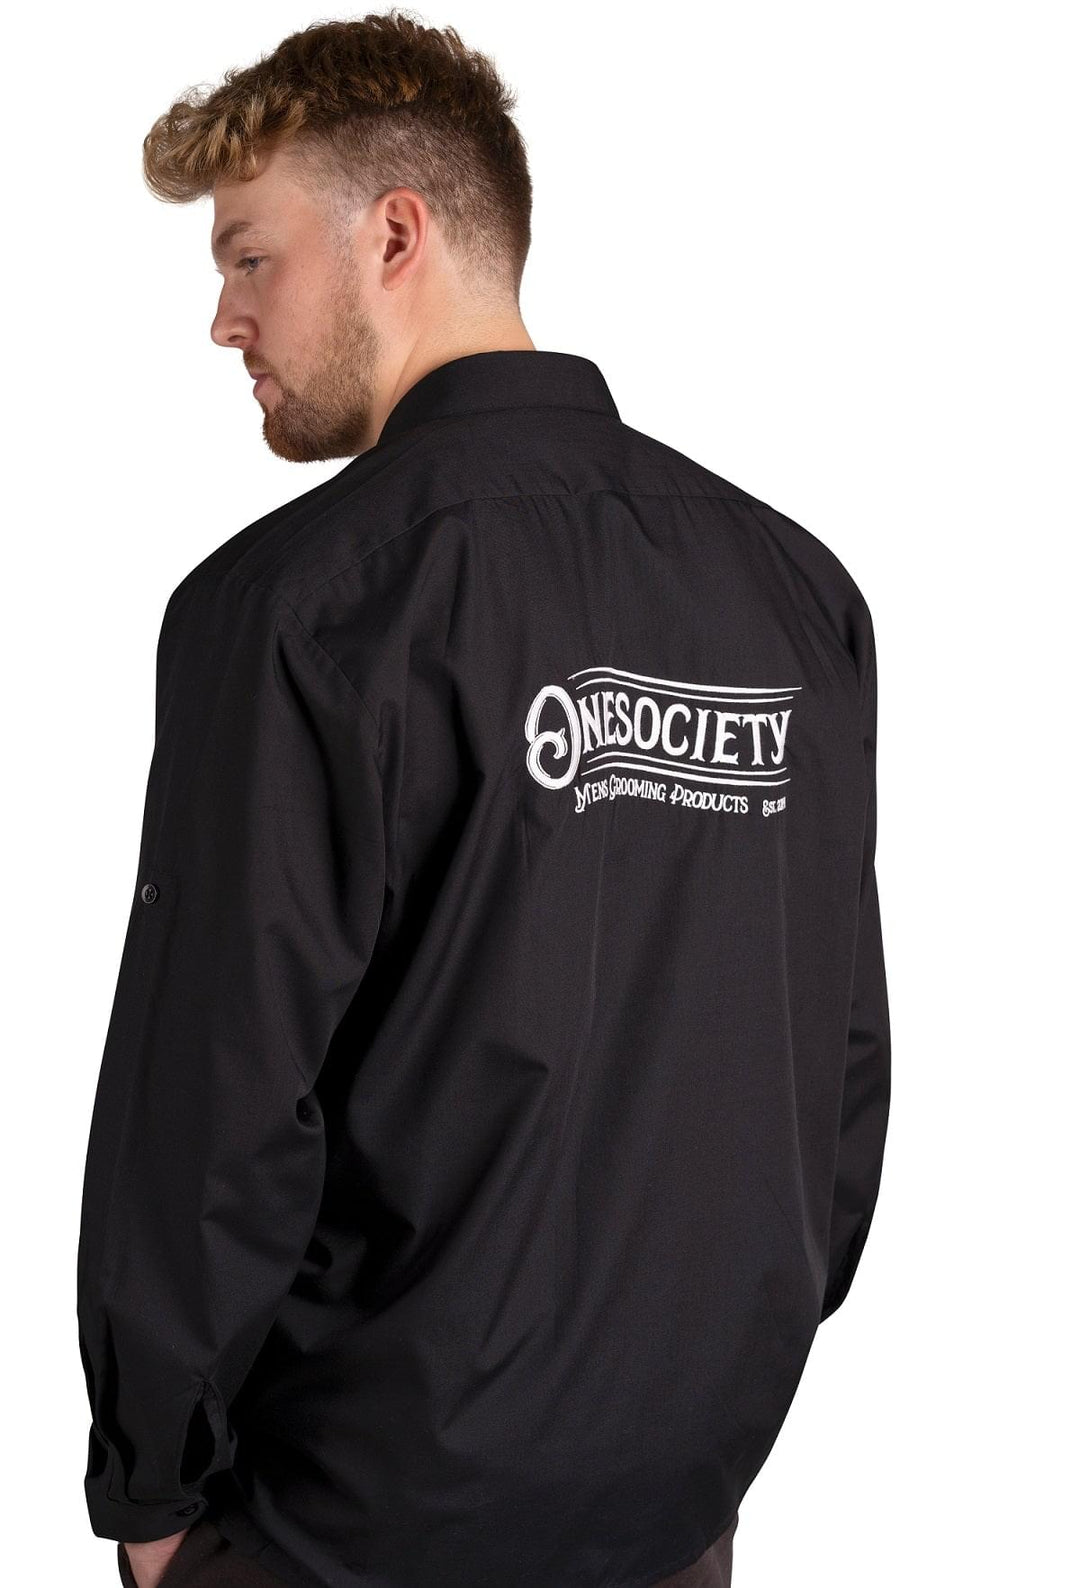 One Society Black Shirt - Experience Style and Quality with Front & Back Embroidery - Onesociety Made in the UK